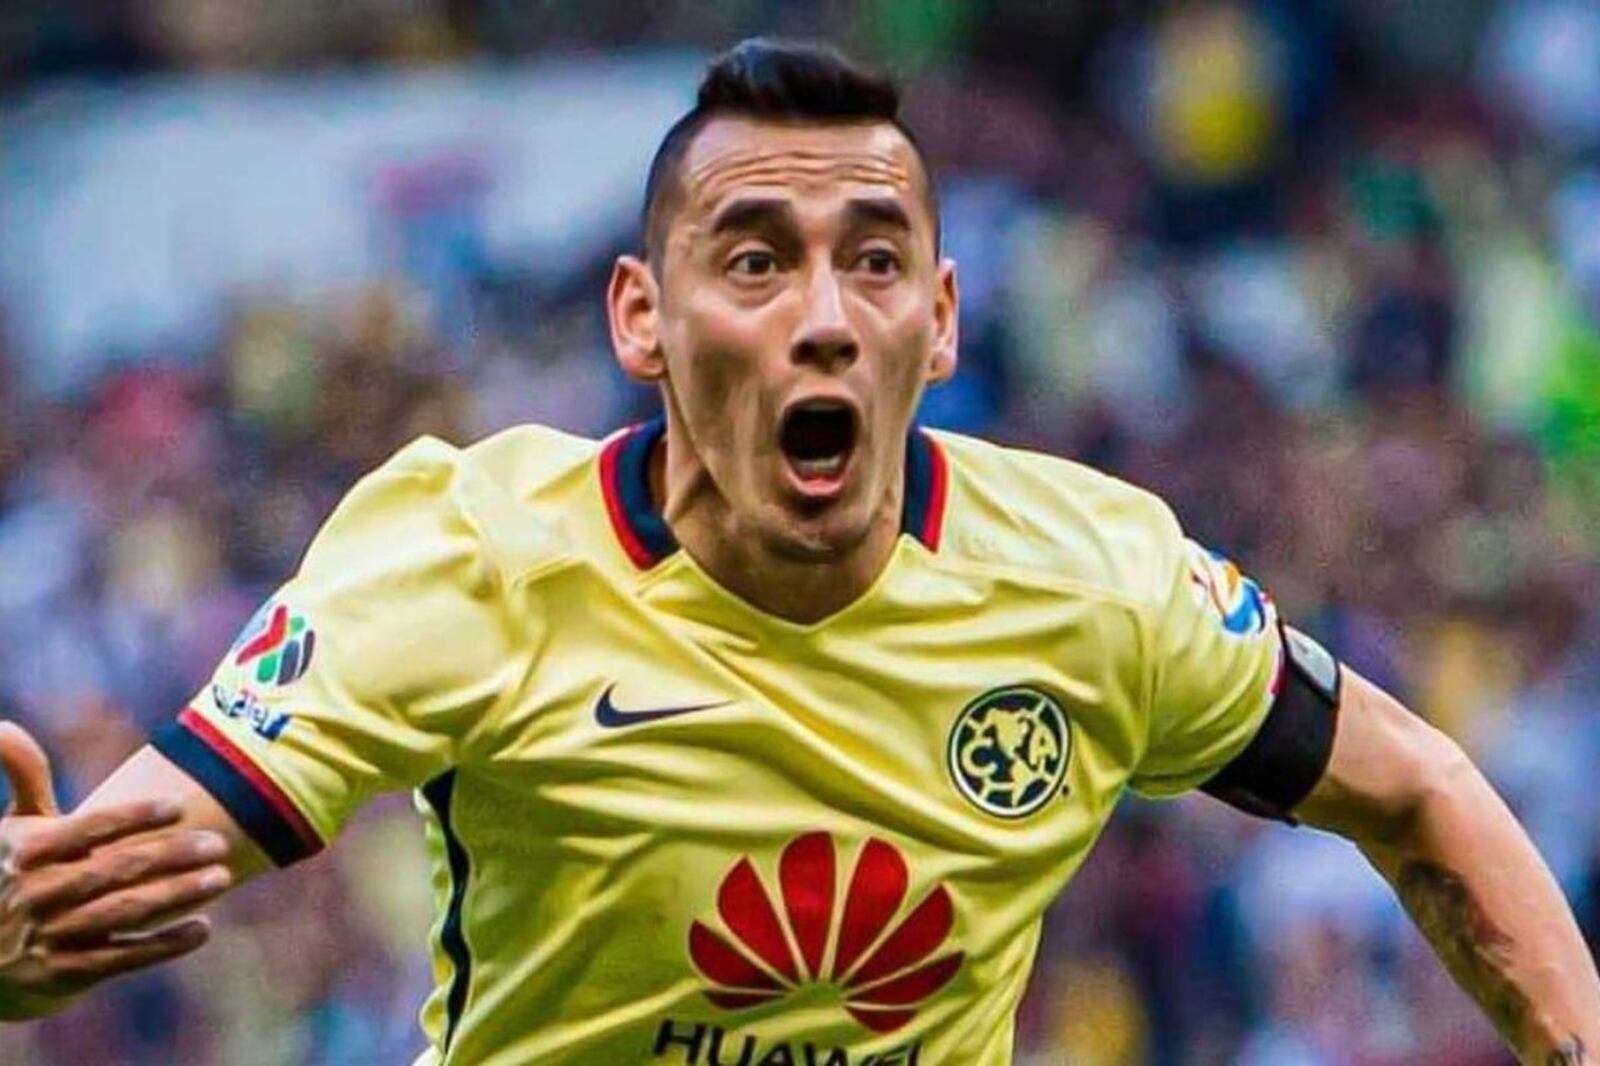 The gesture of Rubens Sambueza that excites the fans of Club América